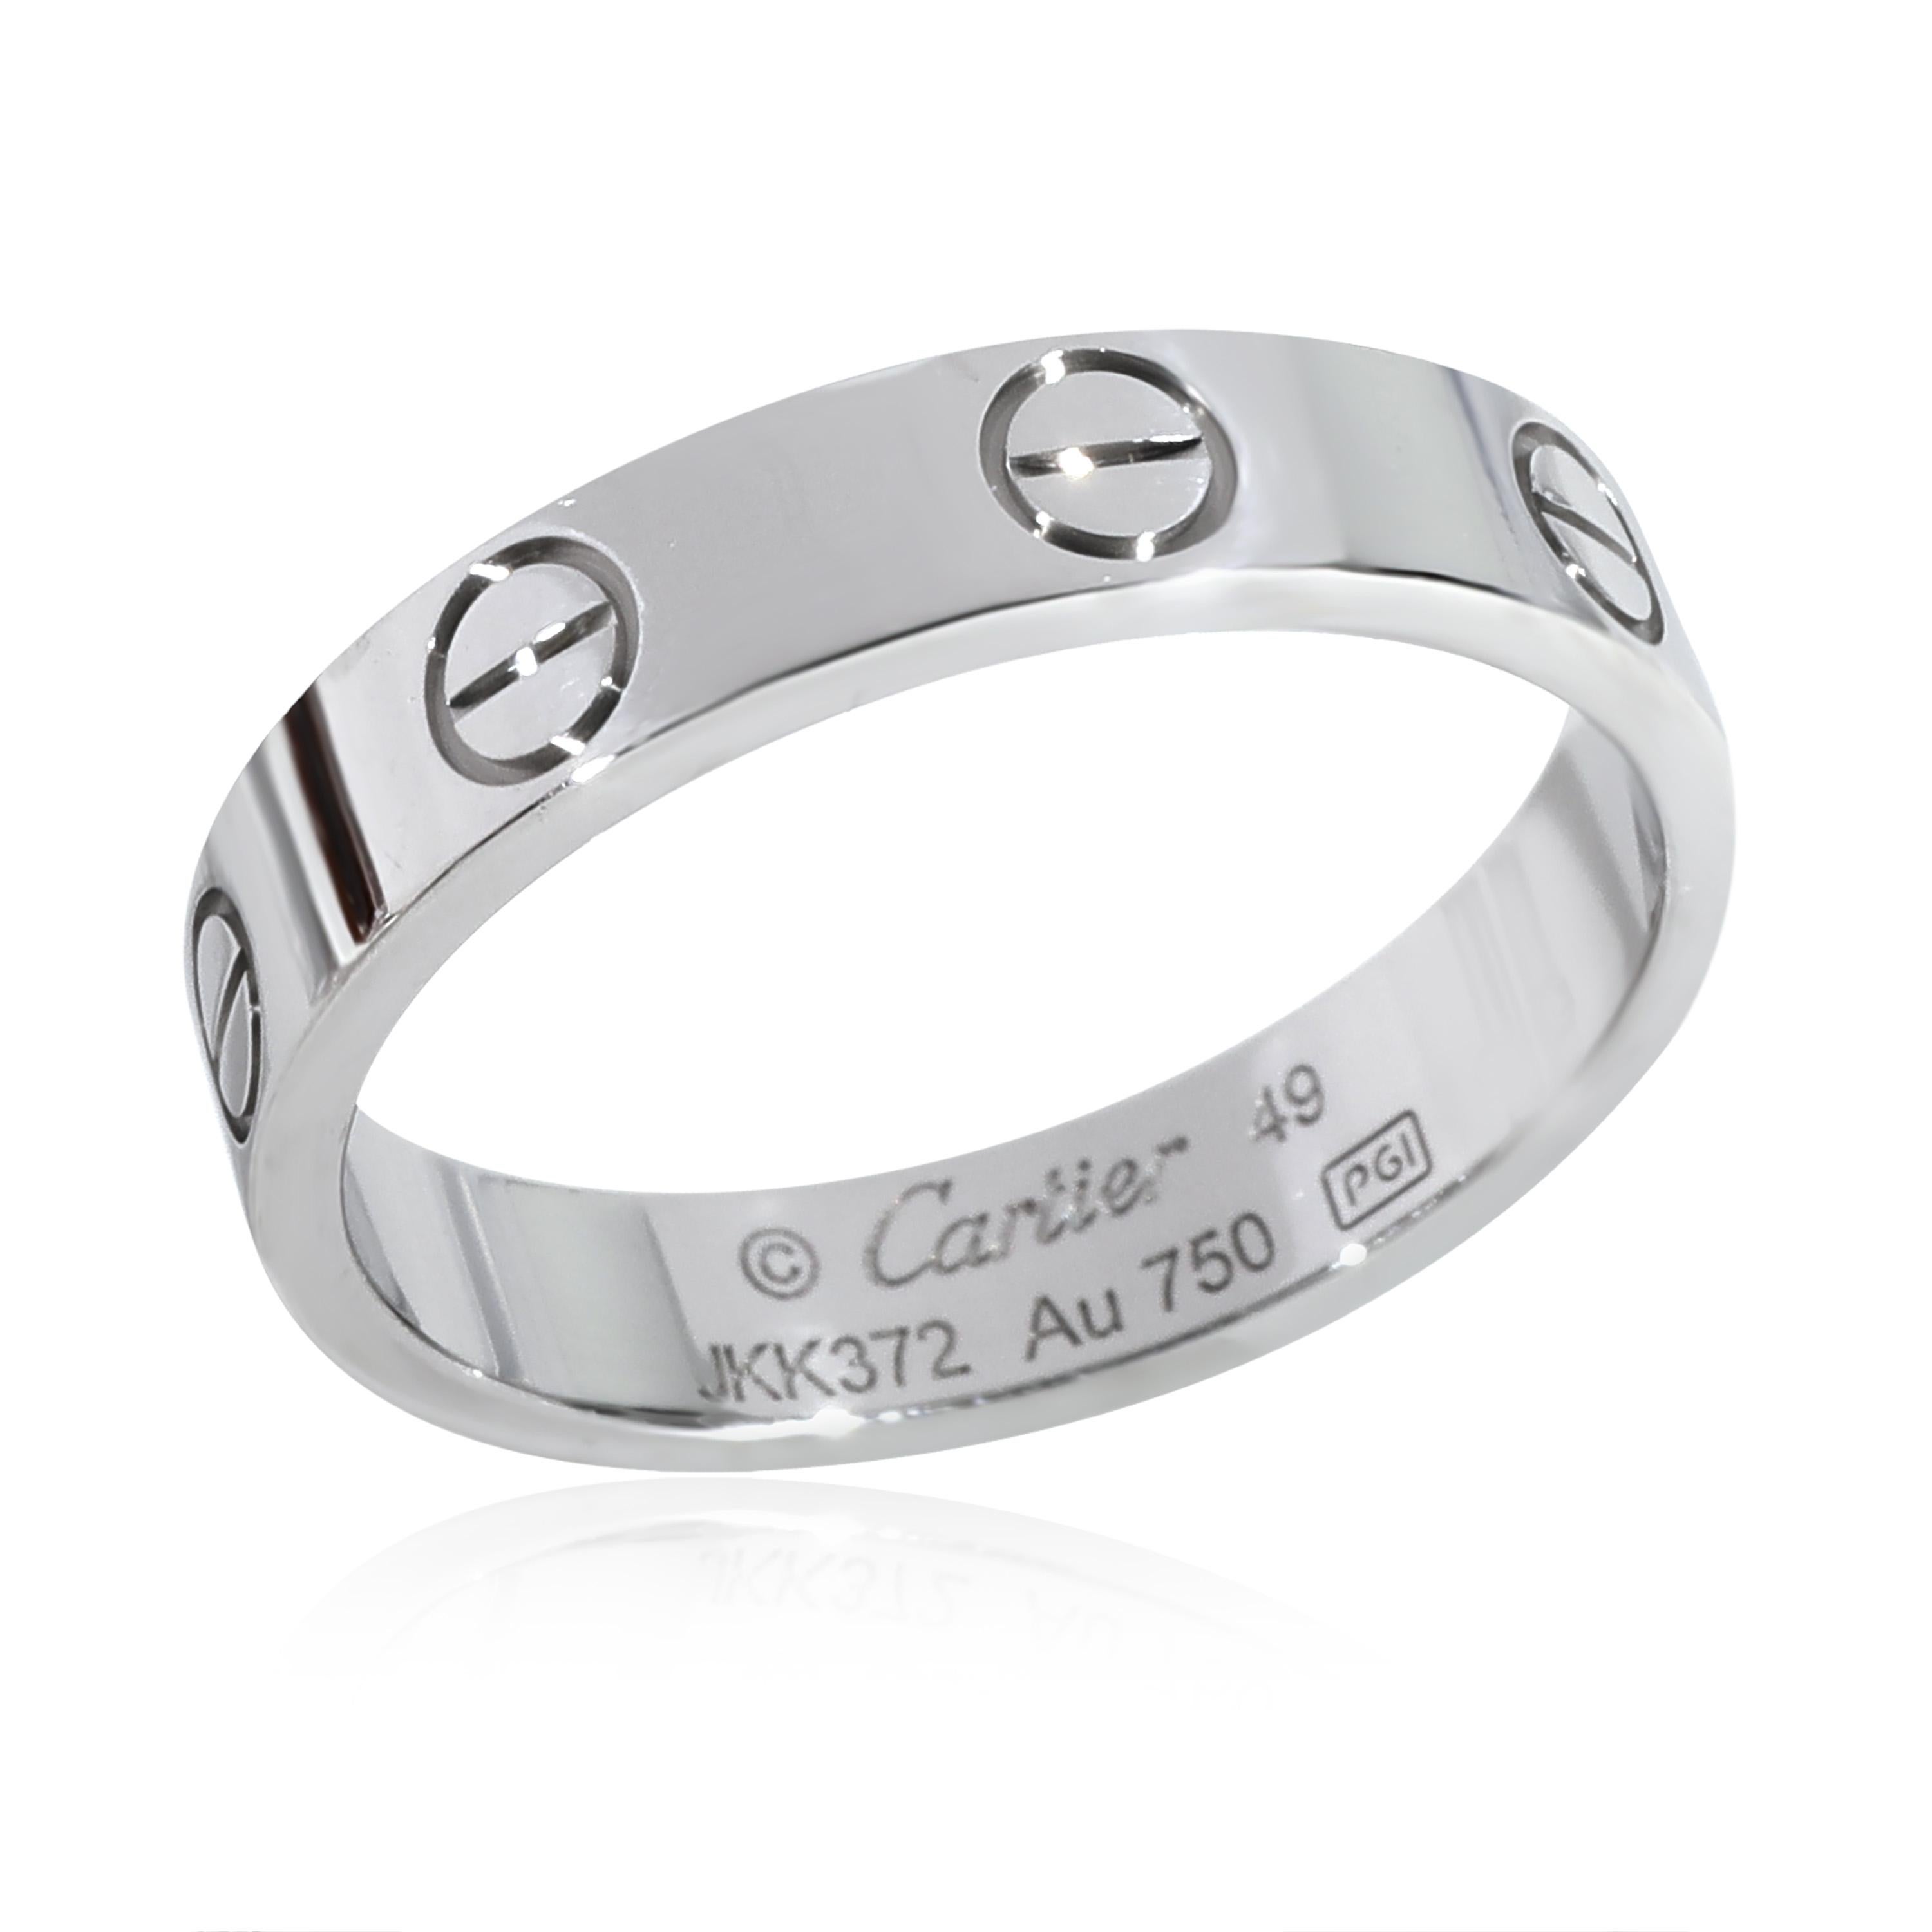 Cartier Love Wedding Band in 18k White Gold In Excellent Condition For Sale In New York, NY